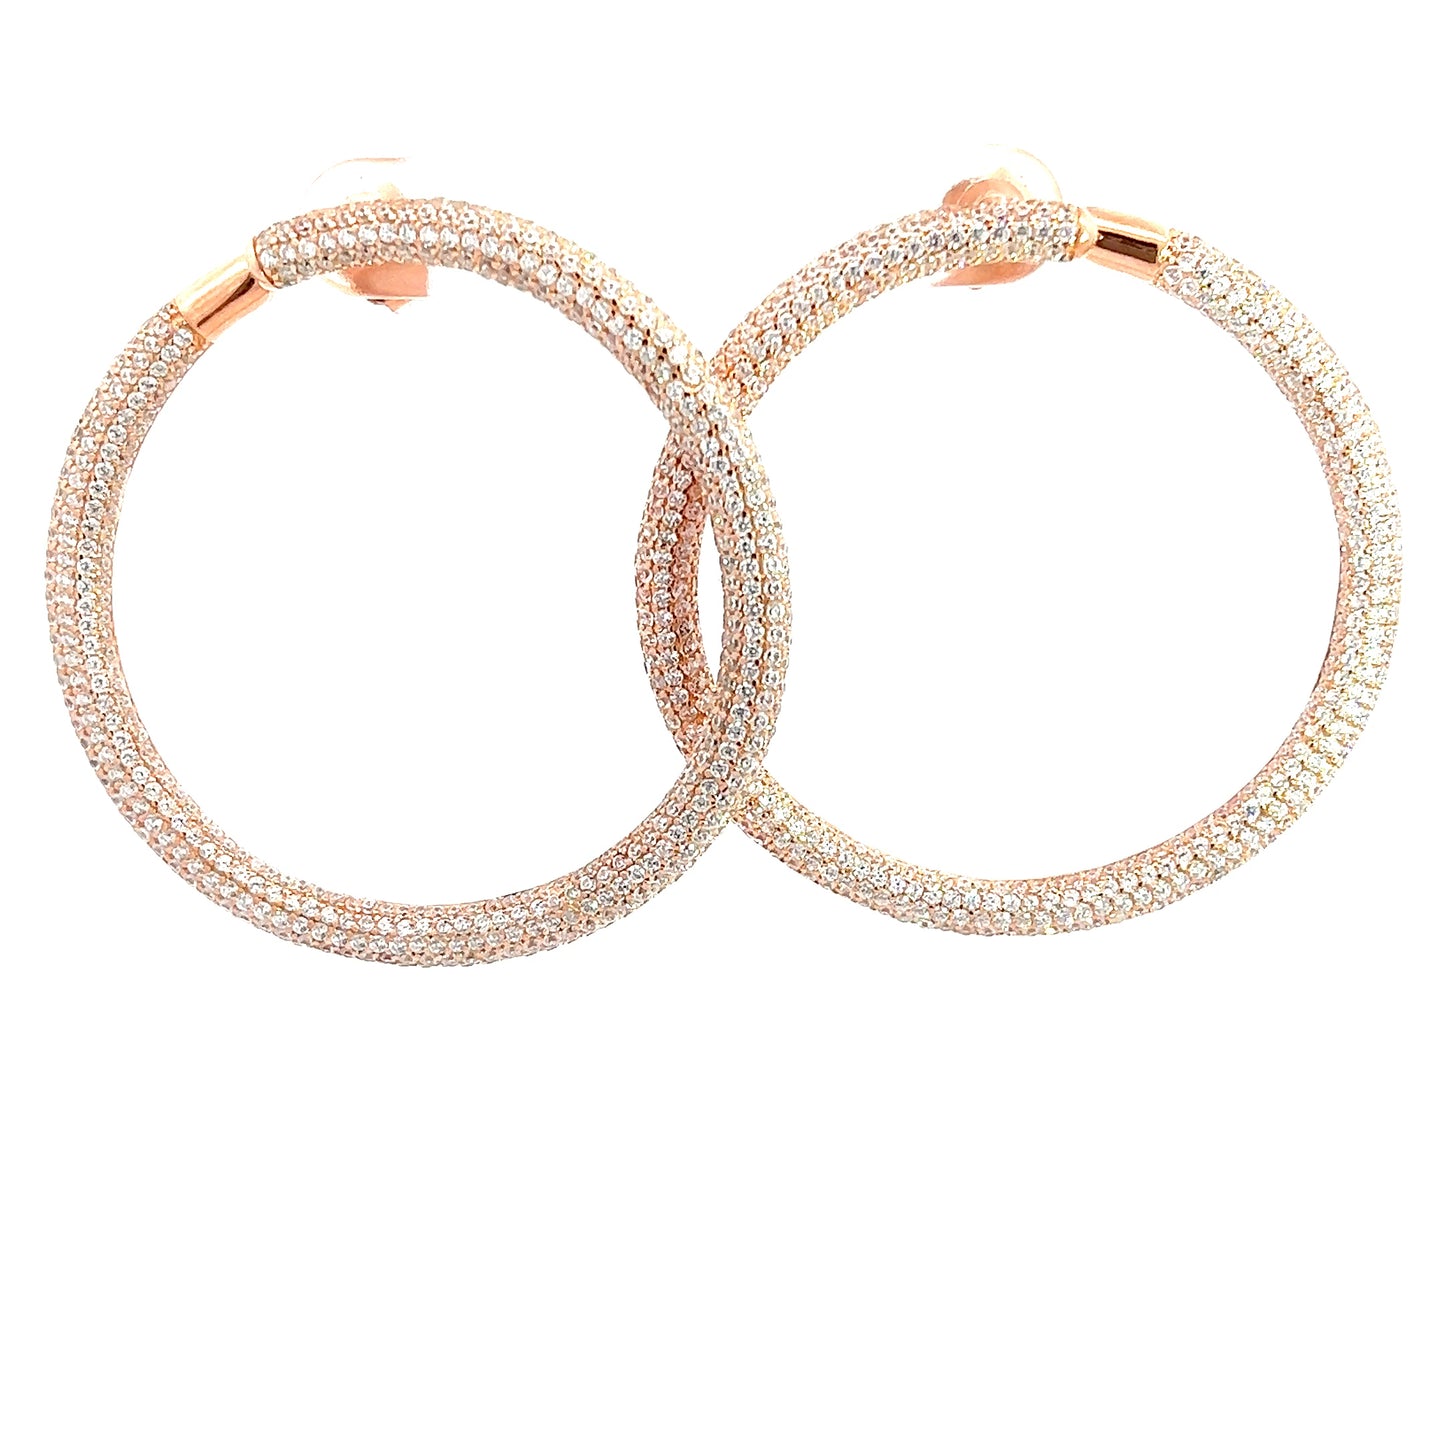 Crystal CZ Rose Gold Hoop Earring - Born To Glam